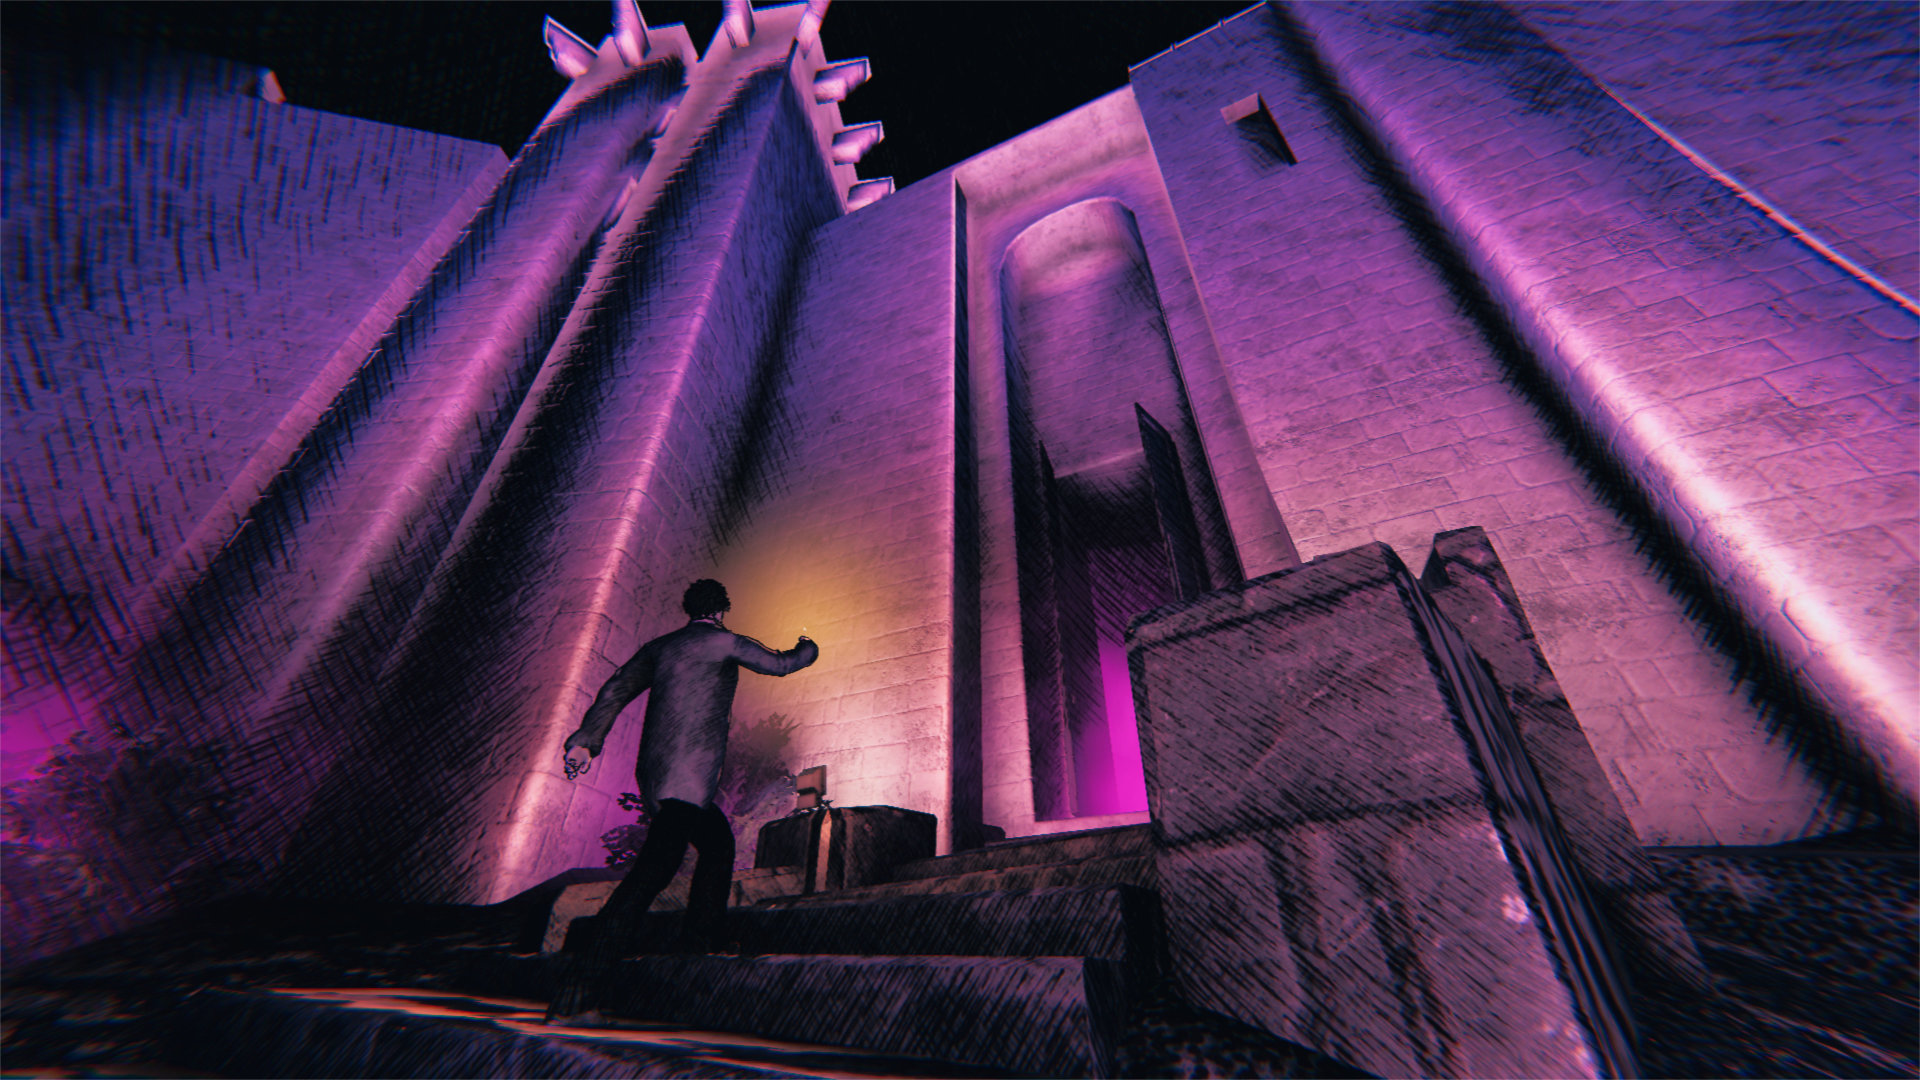 Saturnalia review - a character approaches a the door of a towering building in pink light